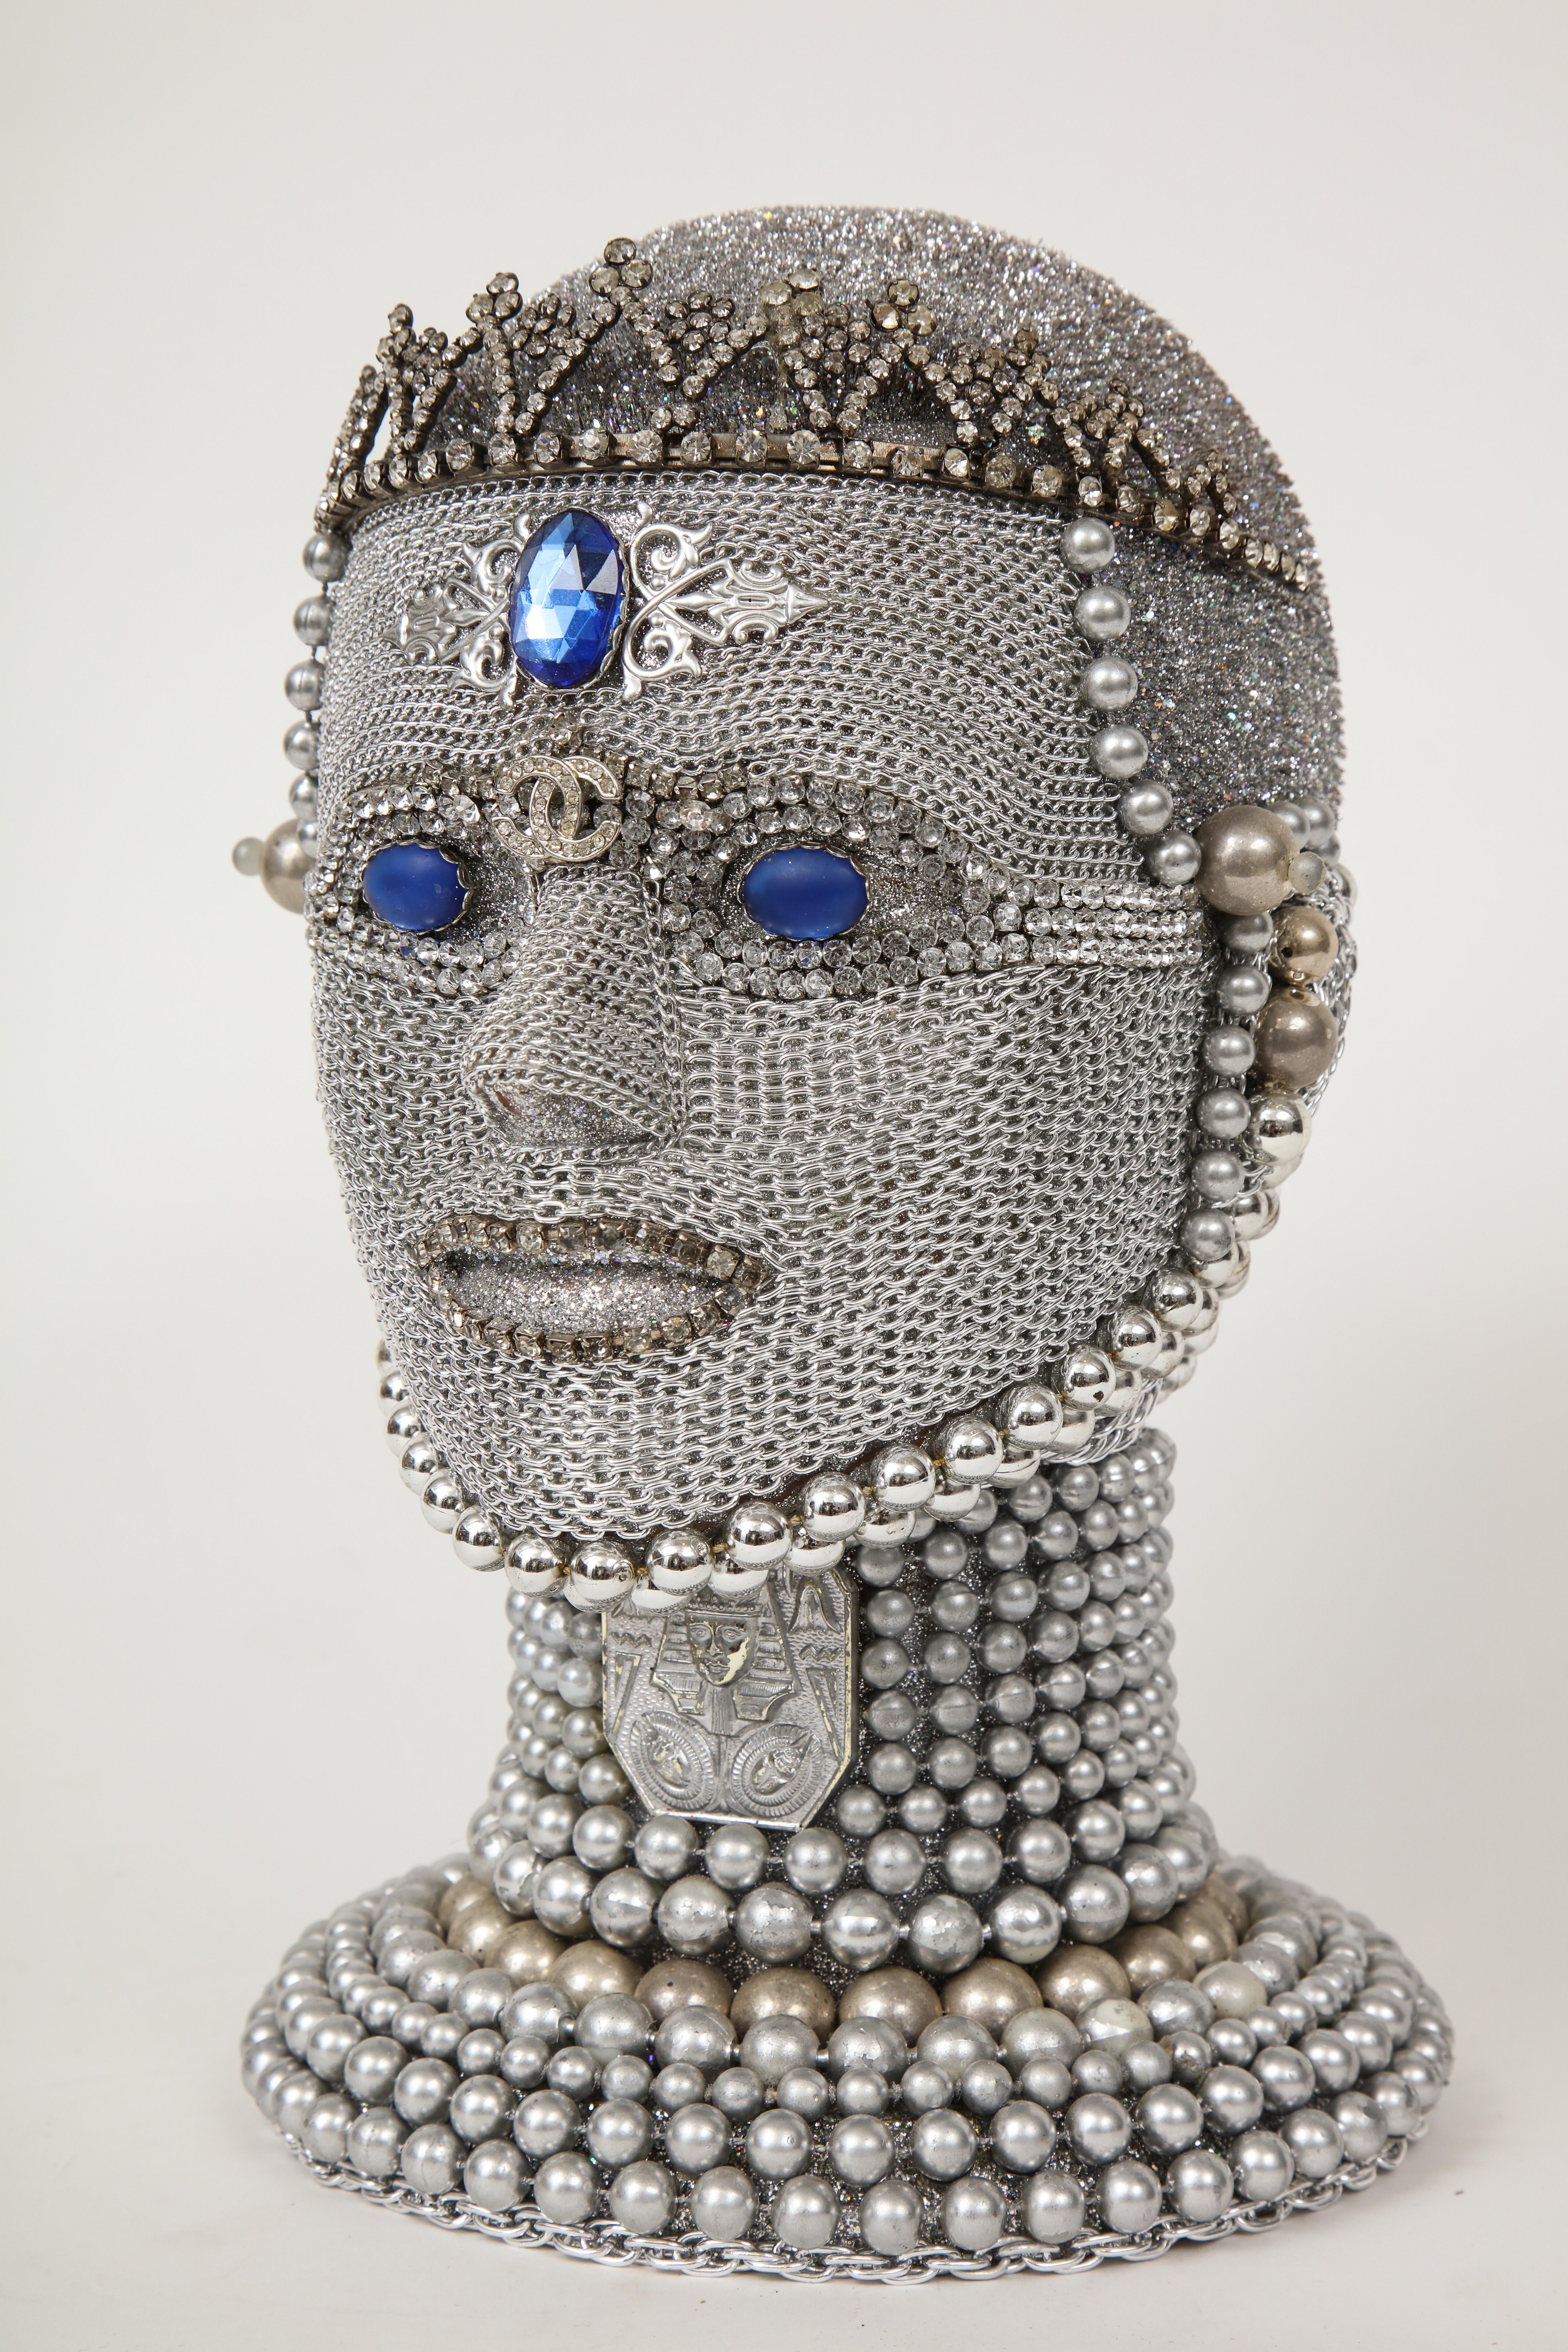 Futuristic android bust with hand applied chain mail and vintage jewelry findings and tiara from New York artist W. Beaupre. Signed.